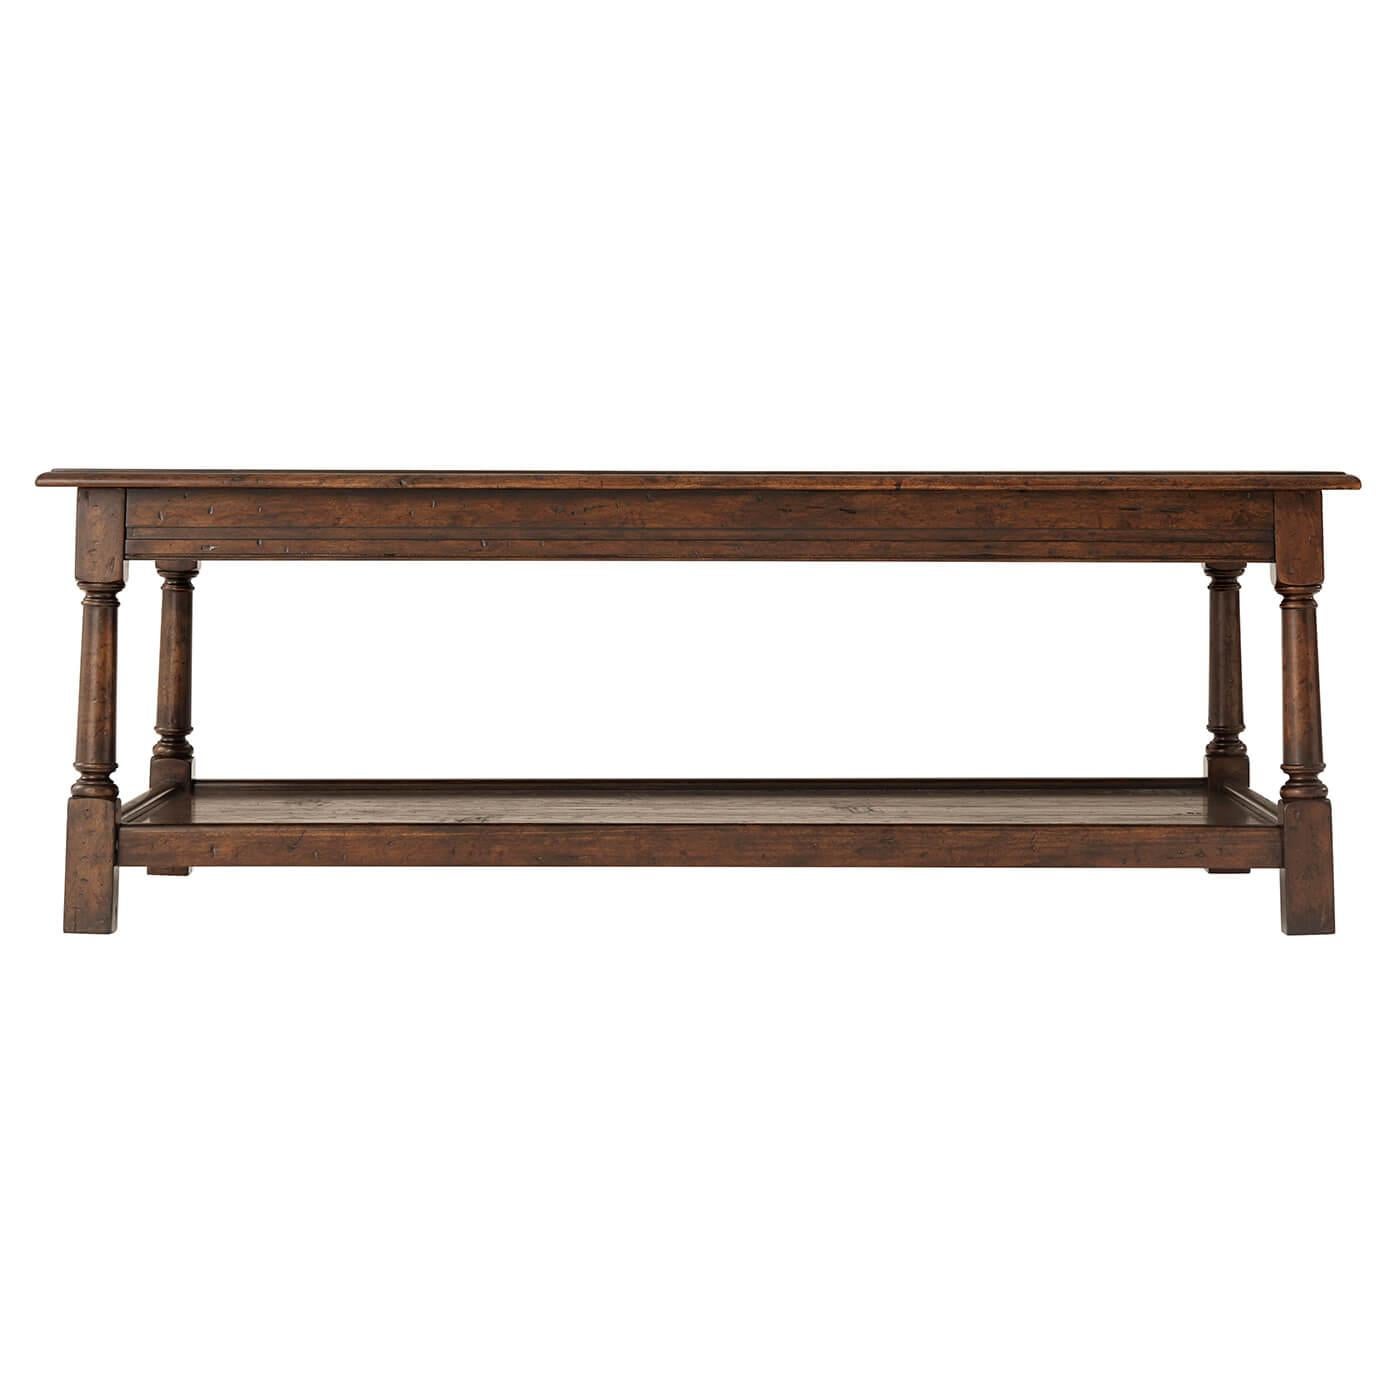 A 17th-century style mahogany and reclaimed oak occasional 'Joynt' cocktail table, the planked rectangular top with a molded edge, above a paneled frieze with gently splayed turned legs terminating in block feet joined by a planked tray under tier.